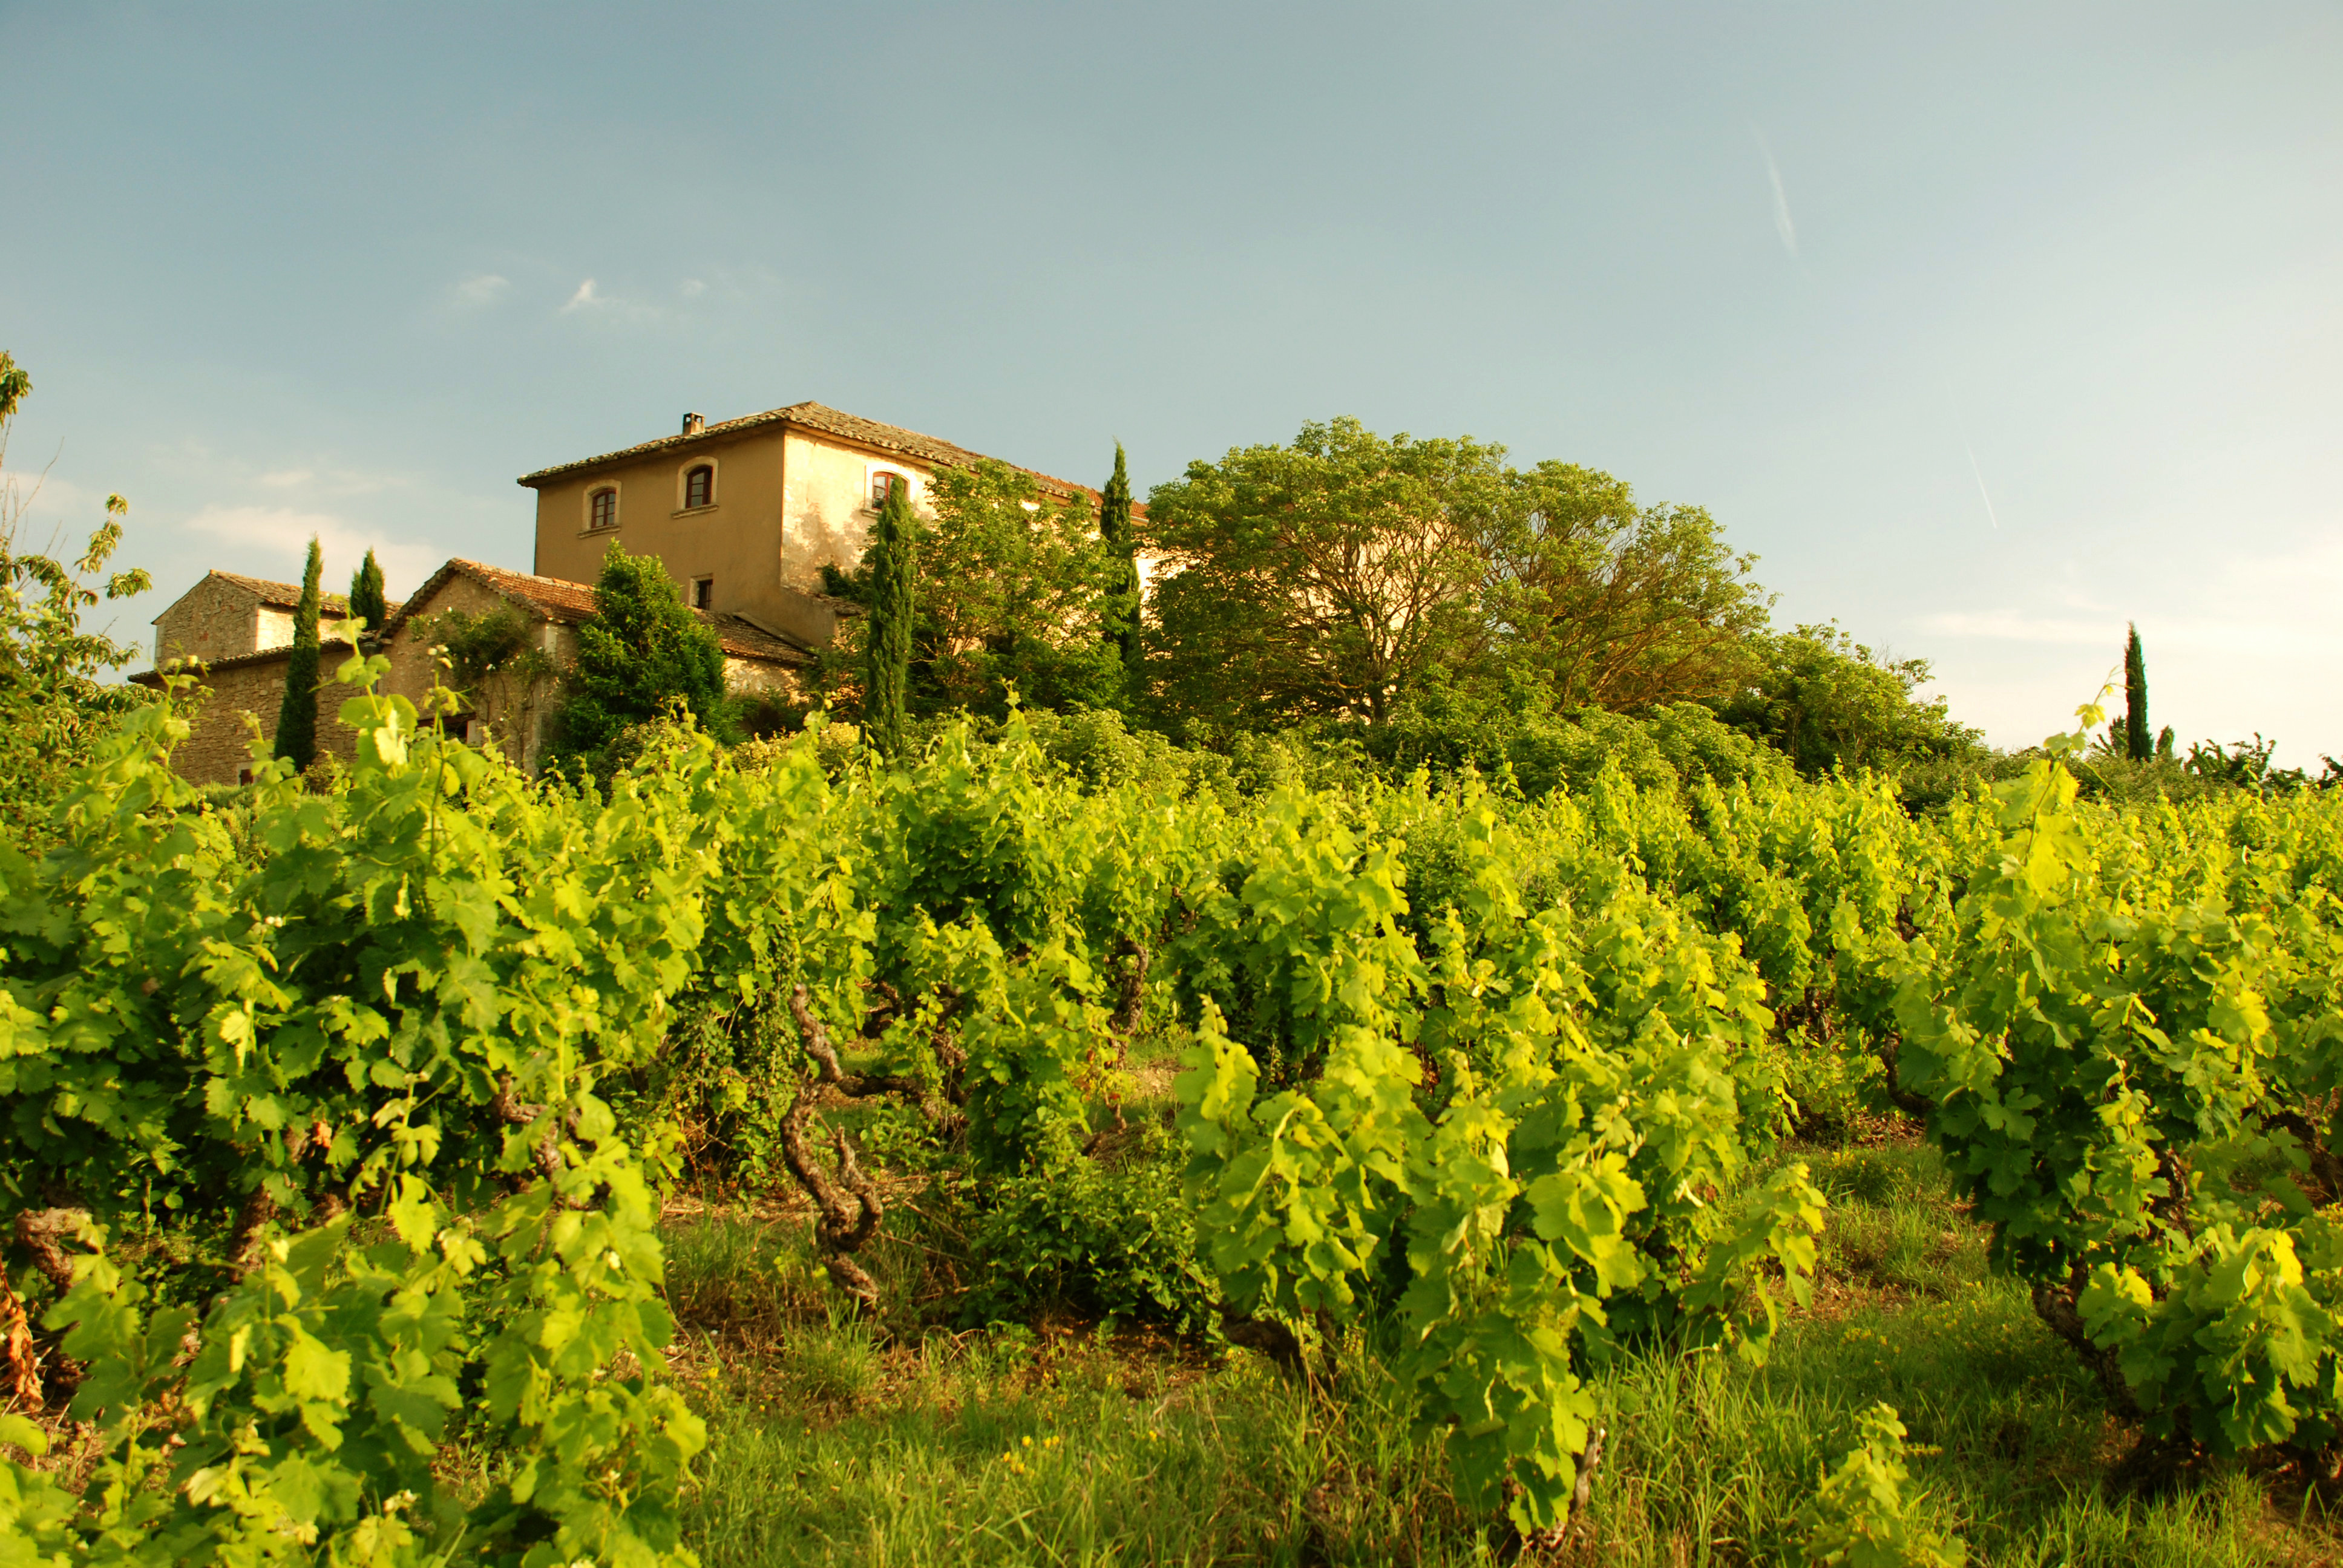 A winery and vineyard in Provence region of France